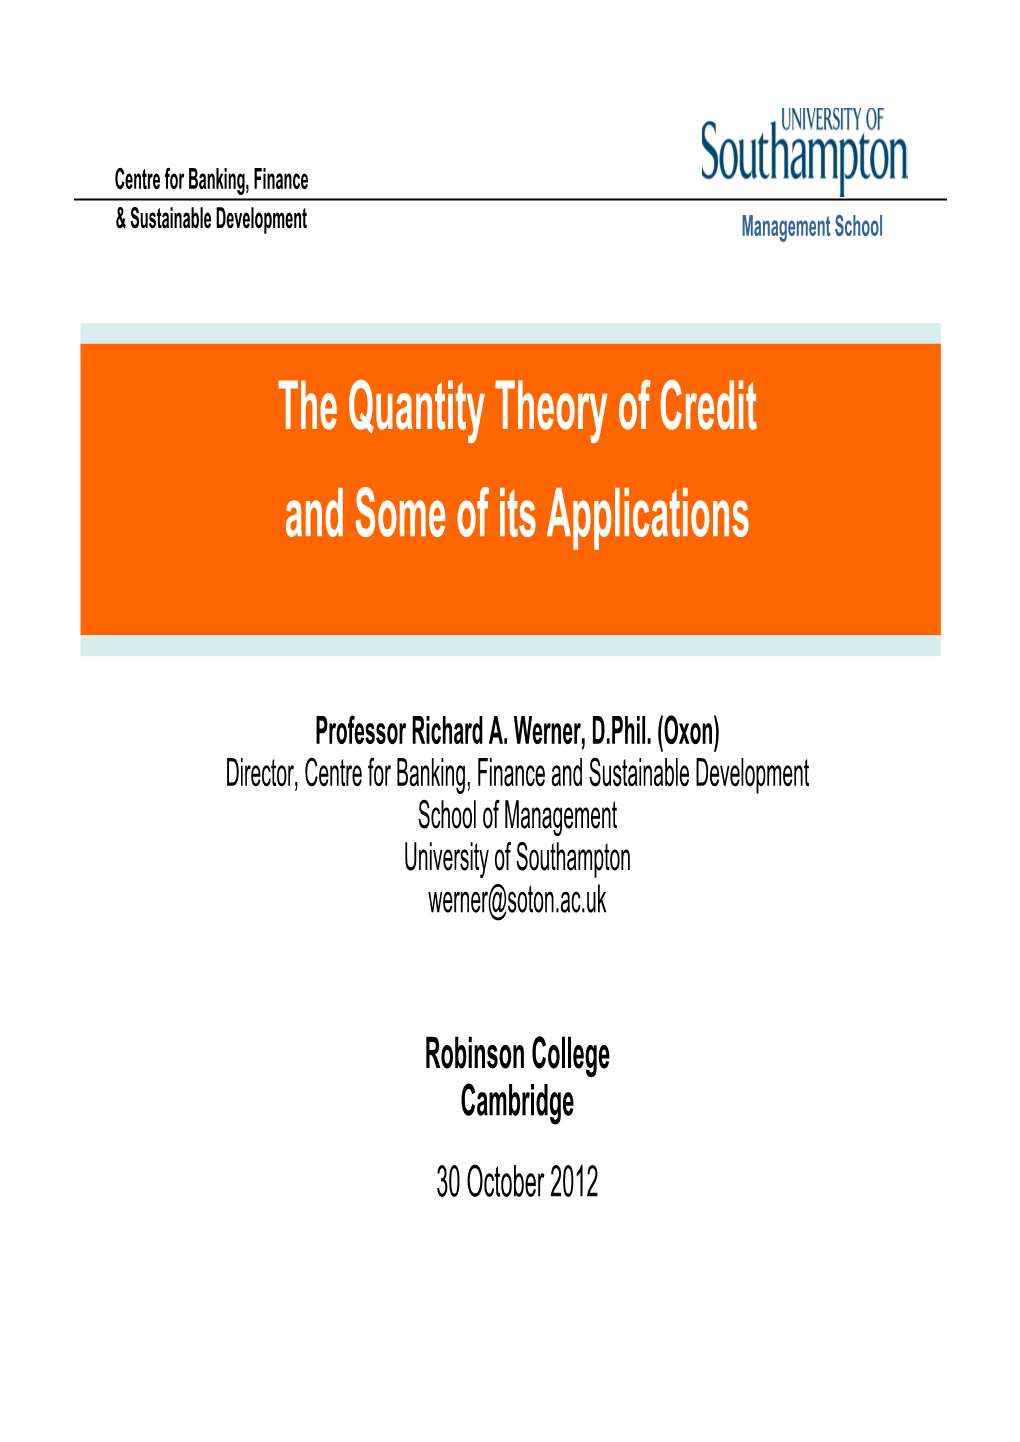 The Quantity Theory of Credit and Some of Its Applications